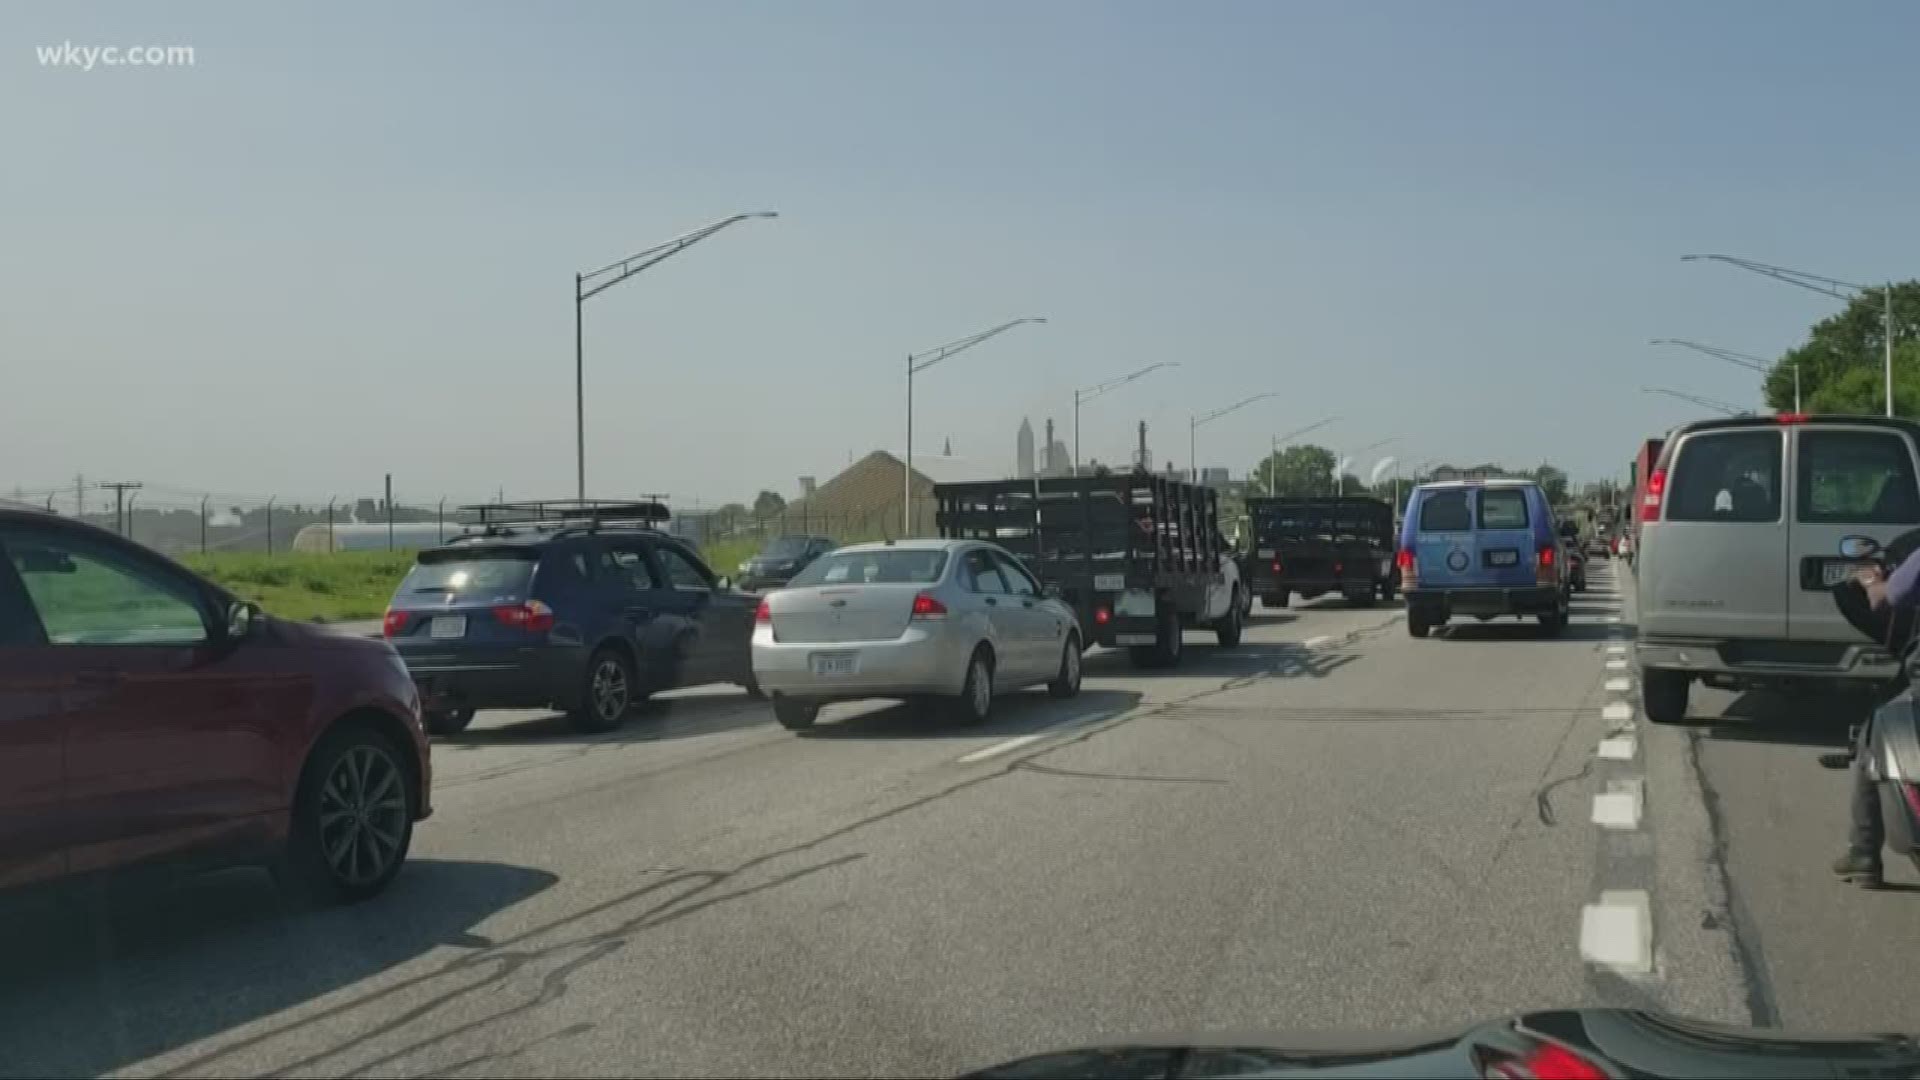 Cleveland Police say the truck lost its load while going northbound from Grant Avenue to the I-490 west ramp. The result was numerous vehicles suffering tire damage. Fire officials estimated that around 100 vehicles sustained flat tires before the highway was closed.